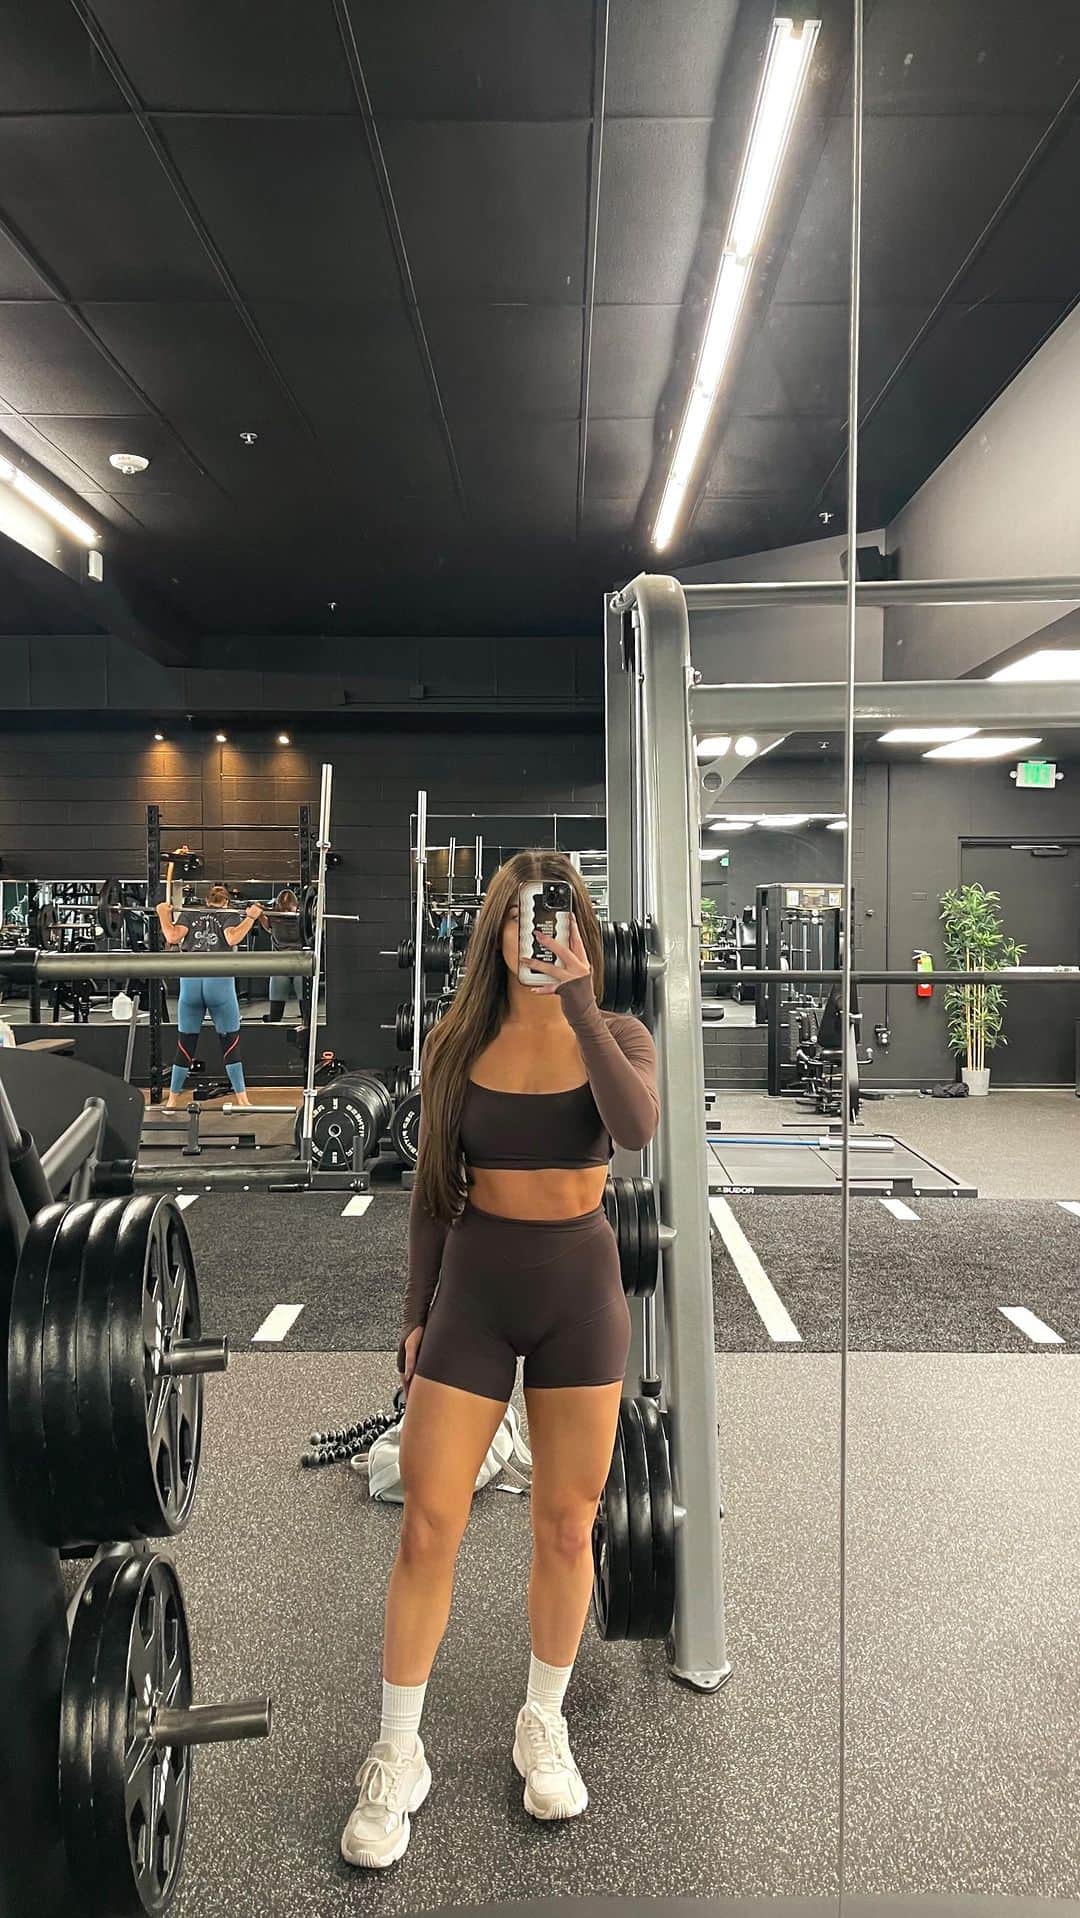 Paige Reillyのインスタグラム：「Leg workout 😌👇🏻🤎⁣ ⁣ Hip thrusts: 4 x 8-10⁣ DB sumo squats: 4 x 10⁣ DB RDL’s: 4 x 8-10⁣ Pendulum squat: 3 x 10⁣ Smith machine reverse lunges: 3 x 8 each leg⁣ ⁣ Outfit: @shopvitality code PAIGE⁣ ♡ Cloud II scoop bra & biker short in espresso⁣ ♡ Cloud II shrug in cocoa contrast⁣ ⁣ ⁣ #gymfit #fitnessworkouts #legworkout #gymmotivation #shopvitality」